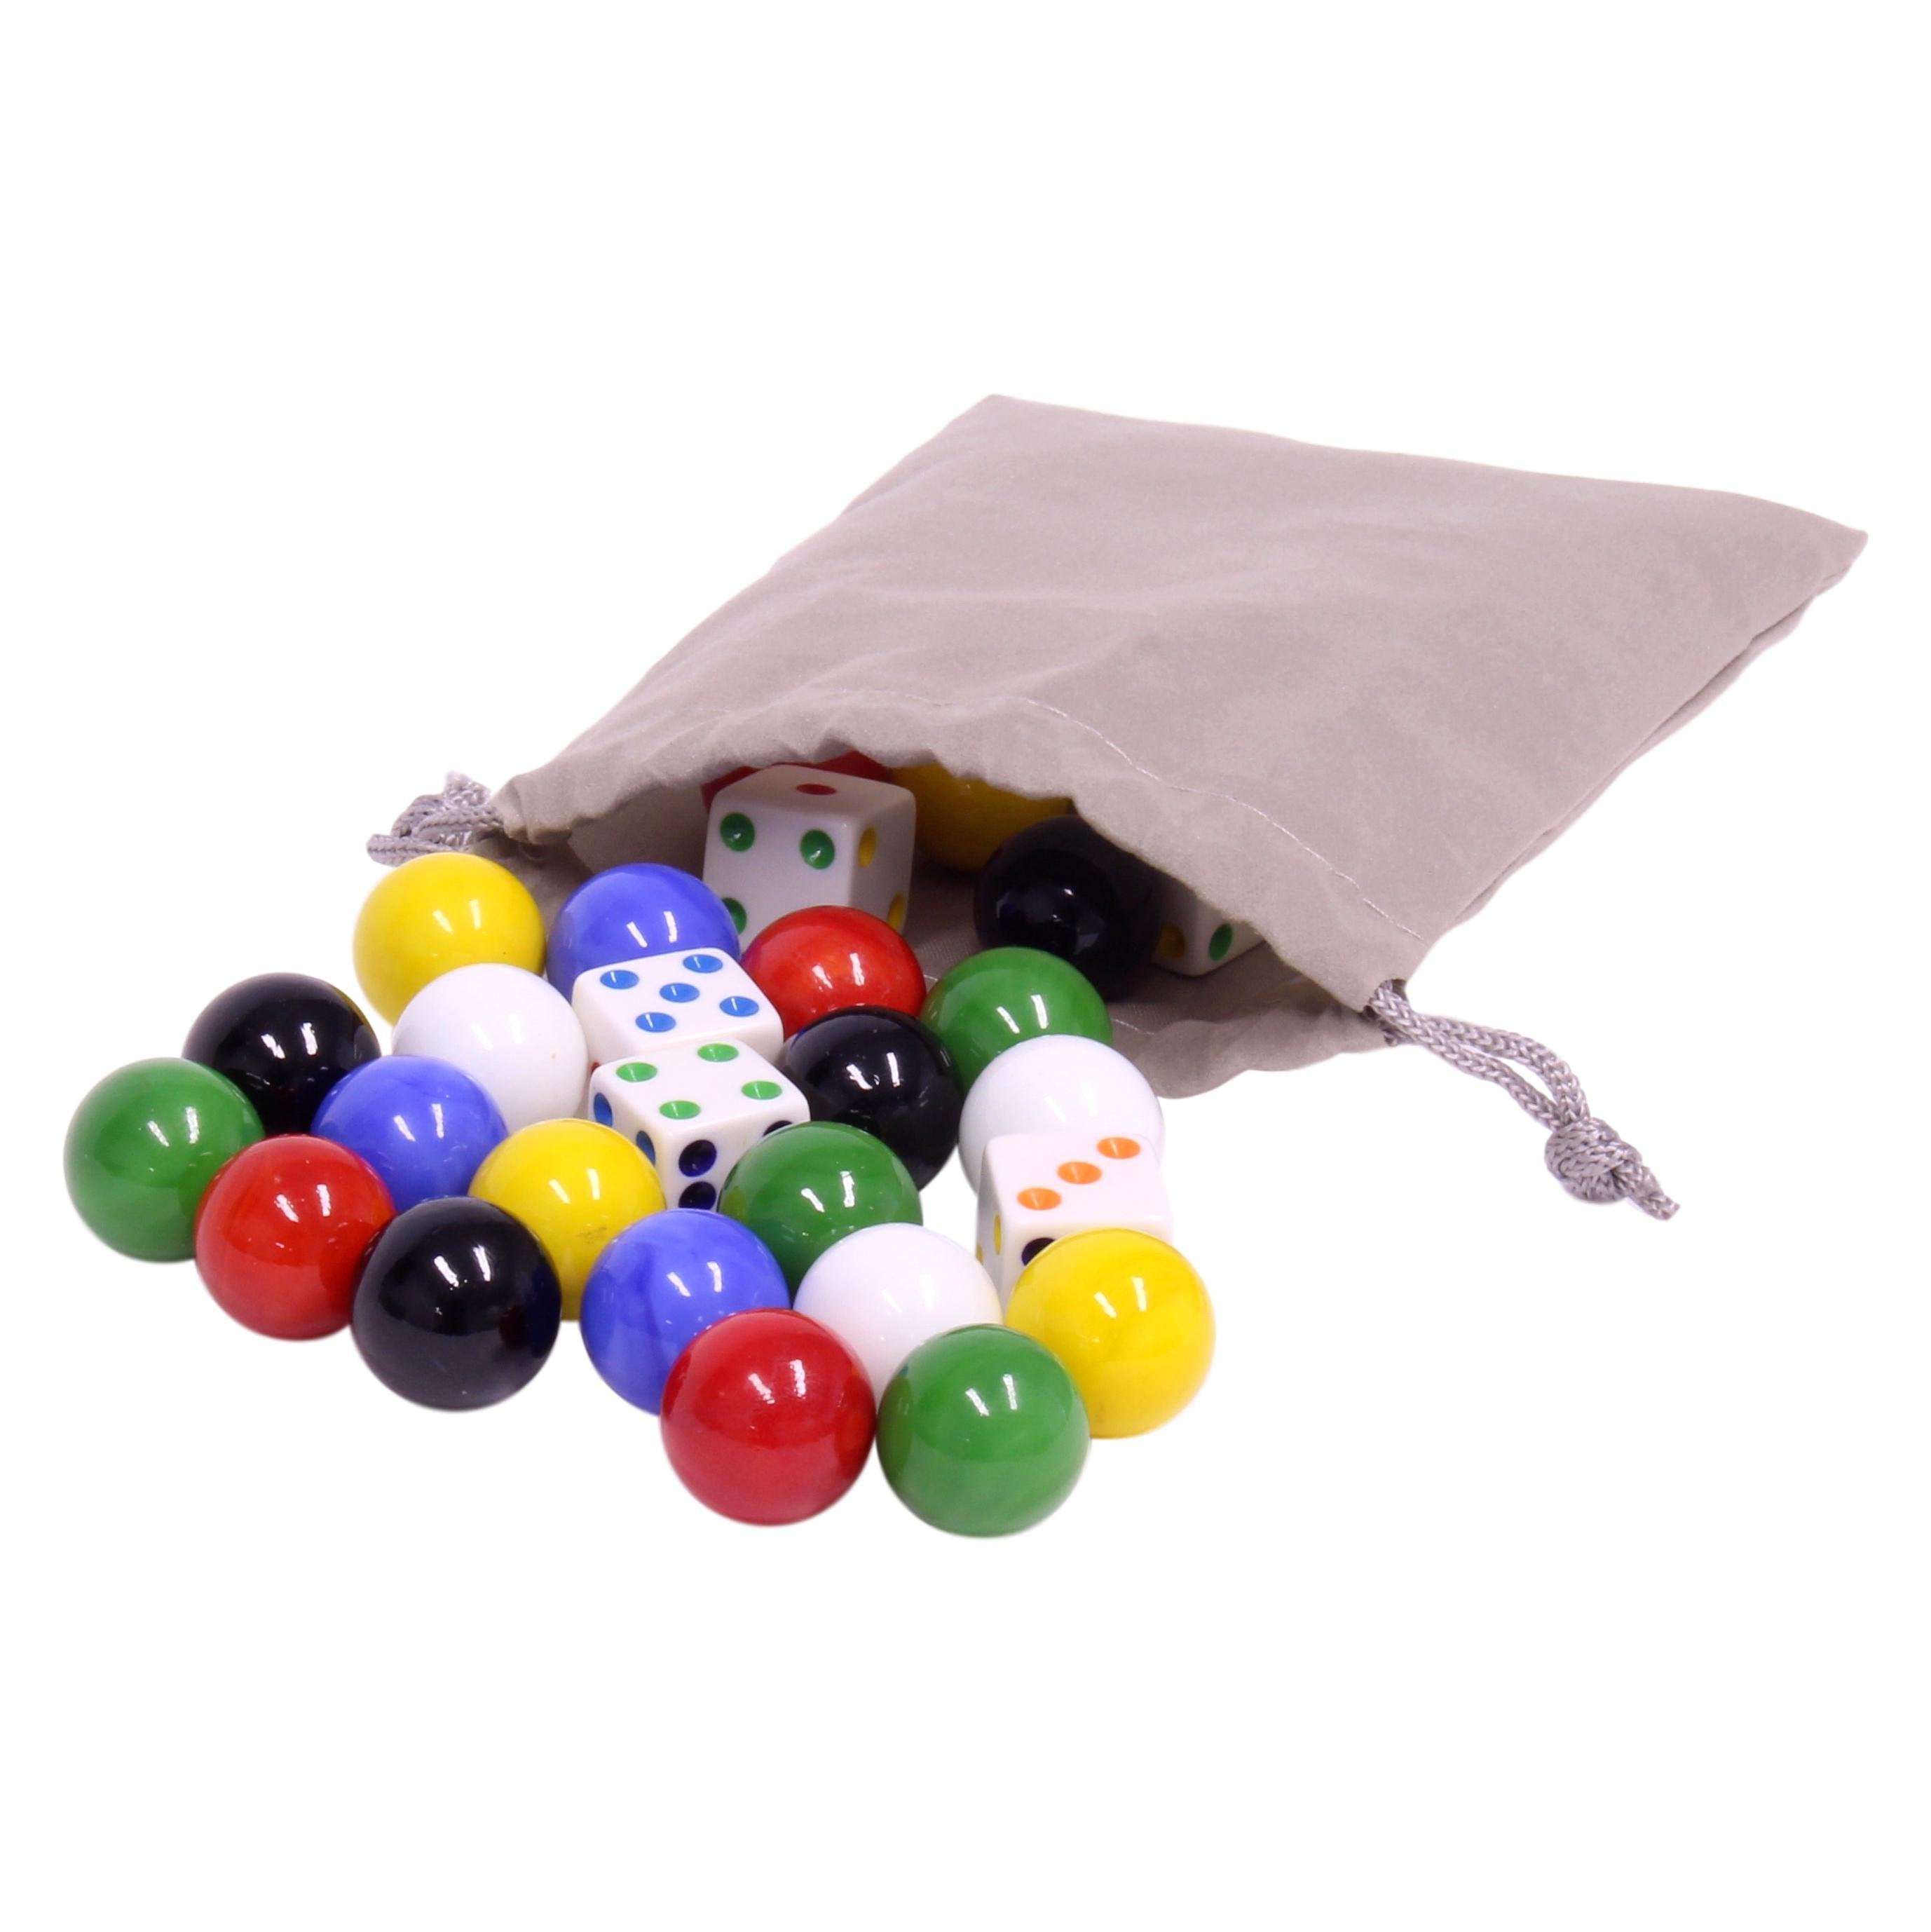 Game Bag of 24 Glass Marbles (17-18mm) and 6 Dice for Aggravation Game